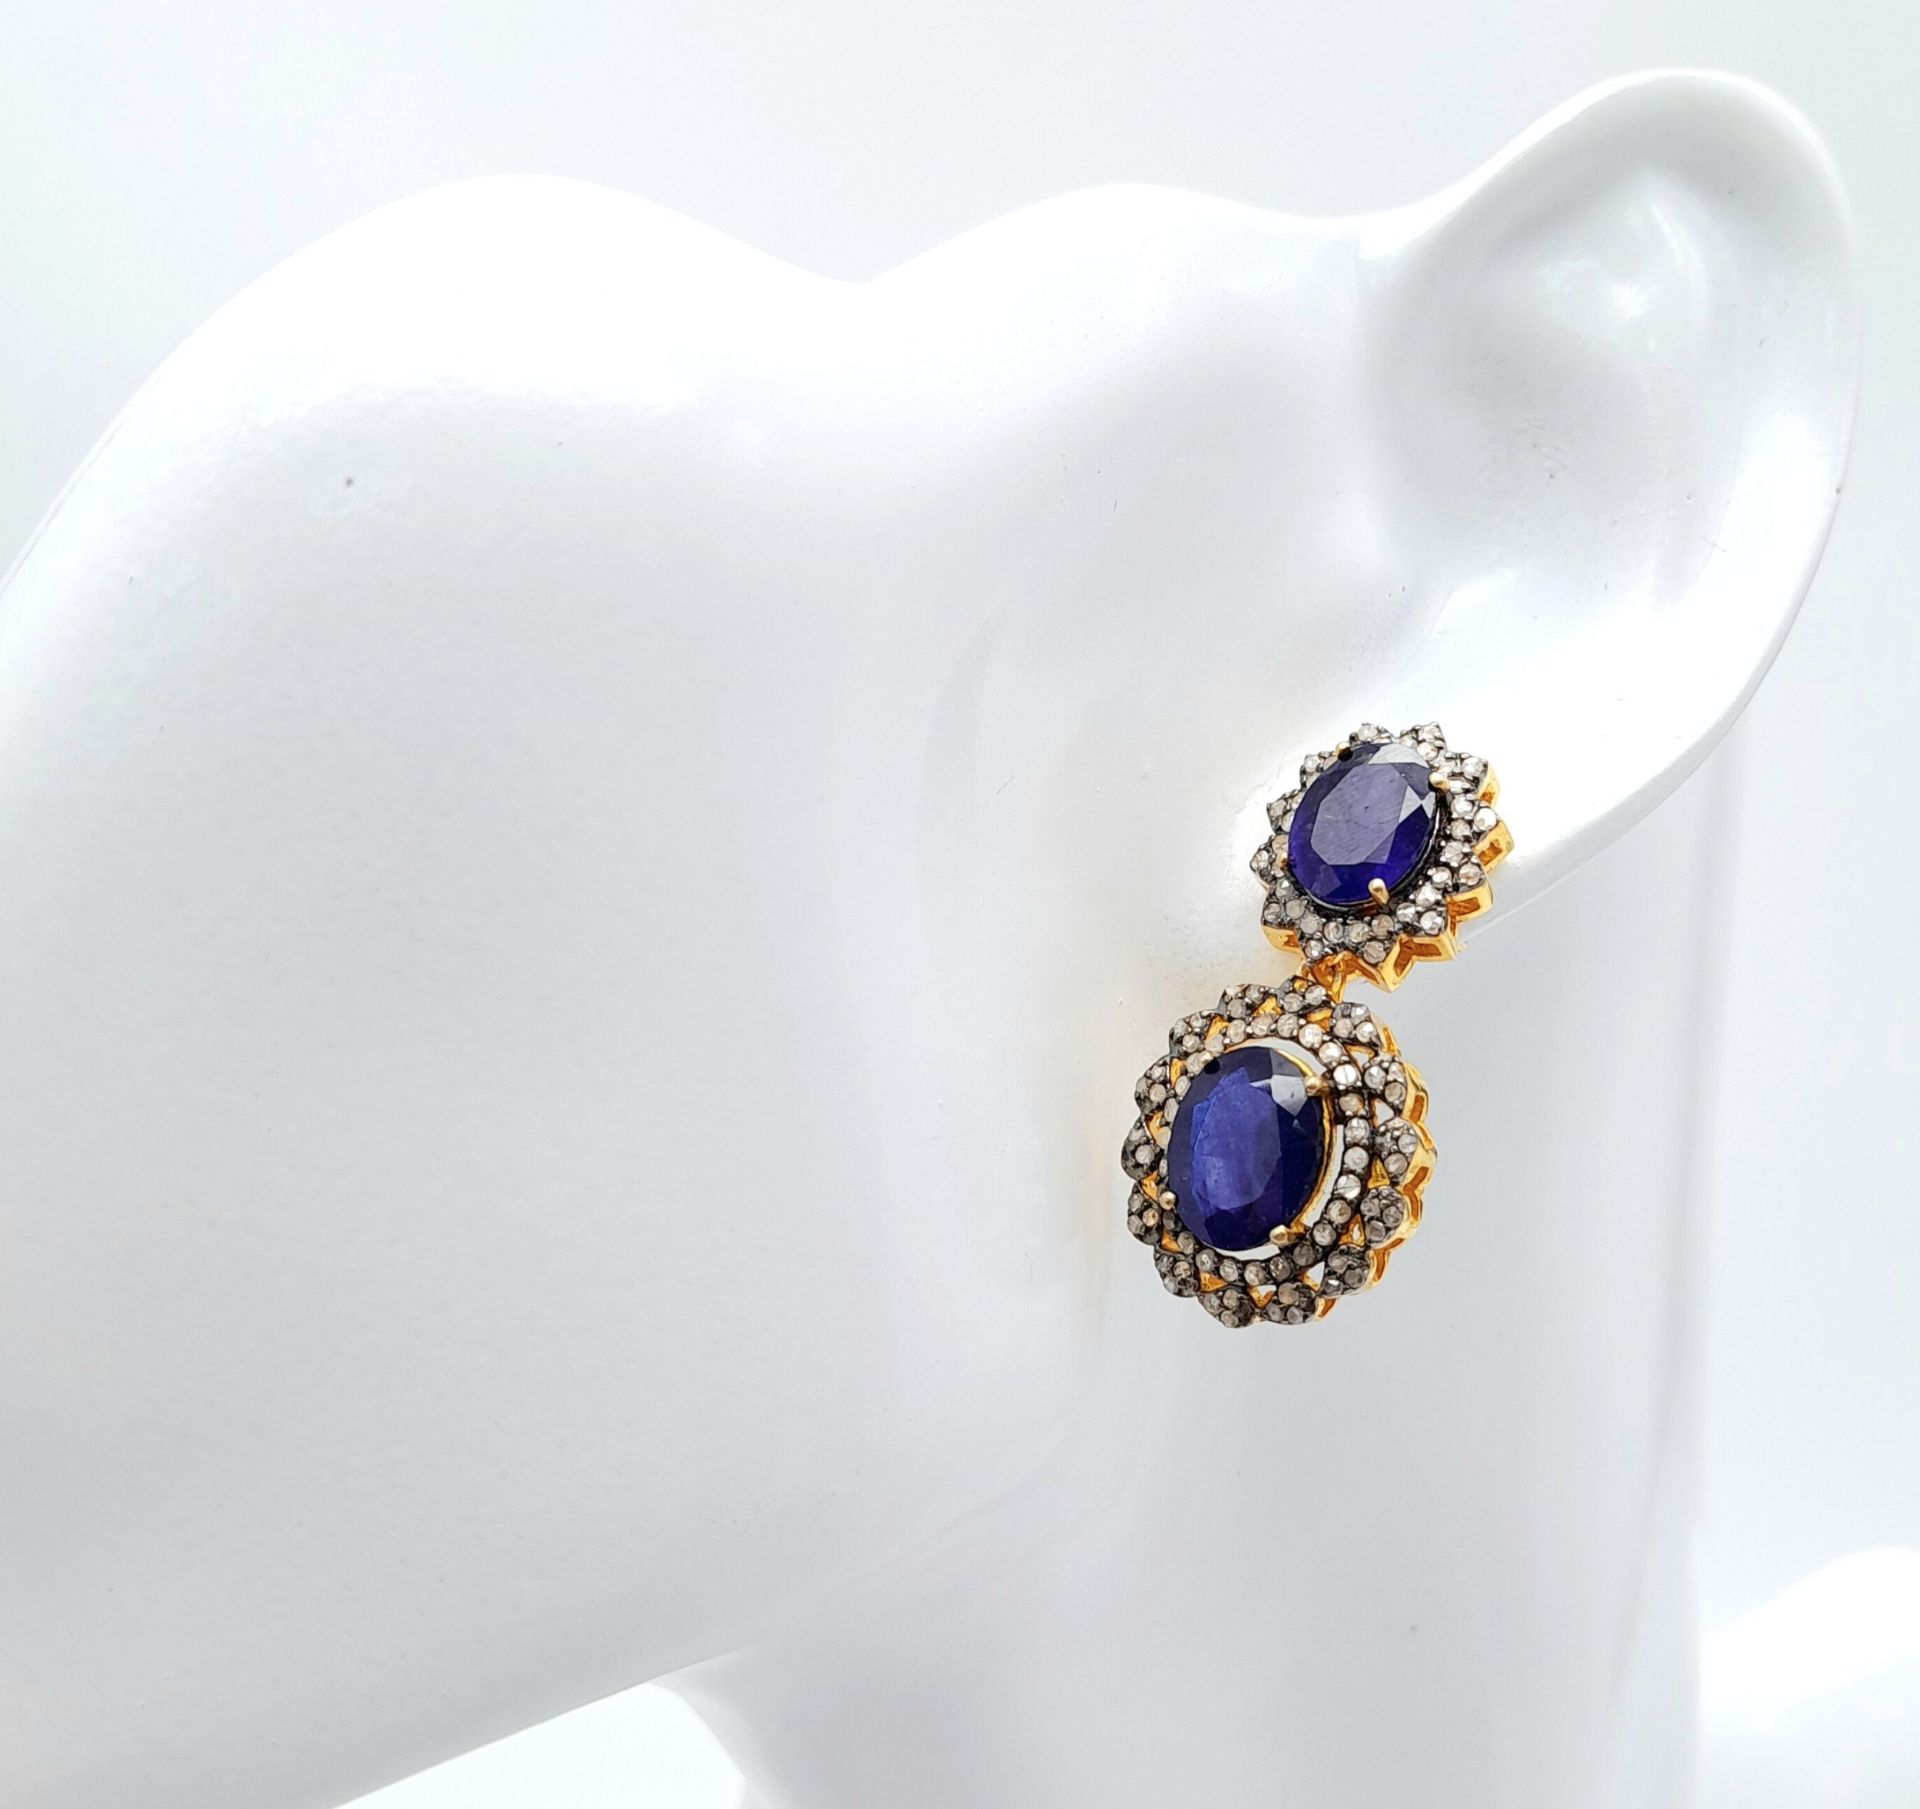 A Pair of Blue Sapphire Gemstone Drop Earrings with Diamond Surrounds. Set in gilded 925 Silver. - Image 4 of 5